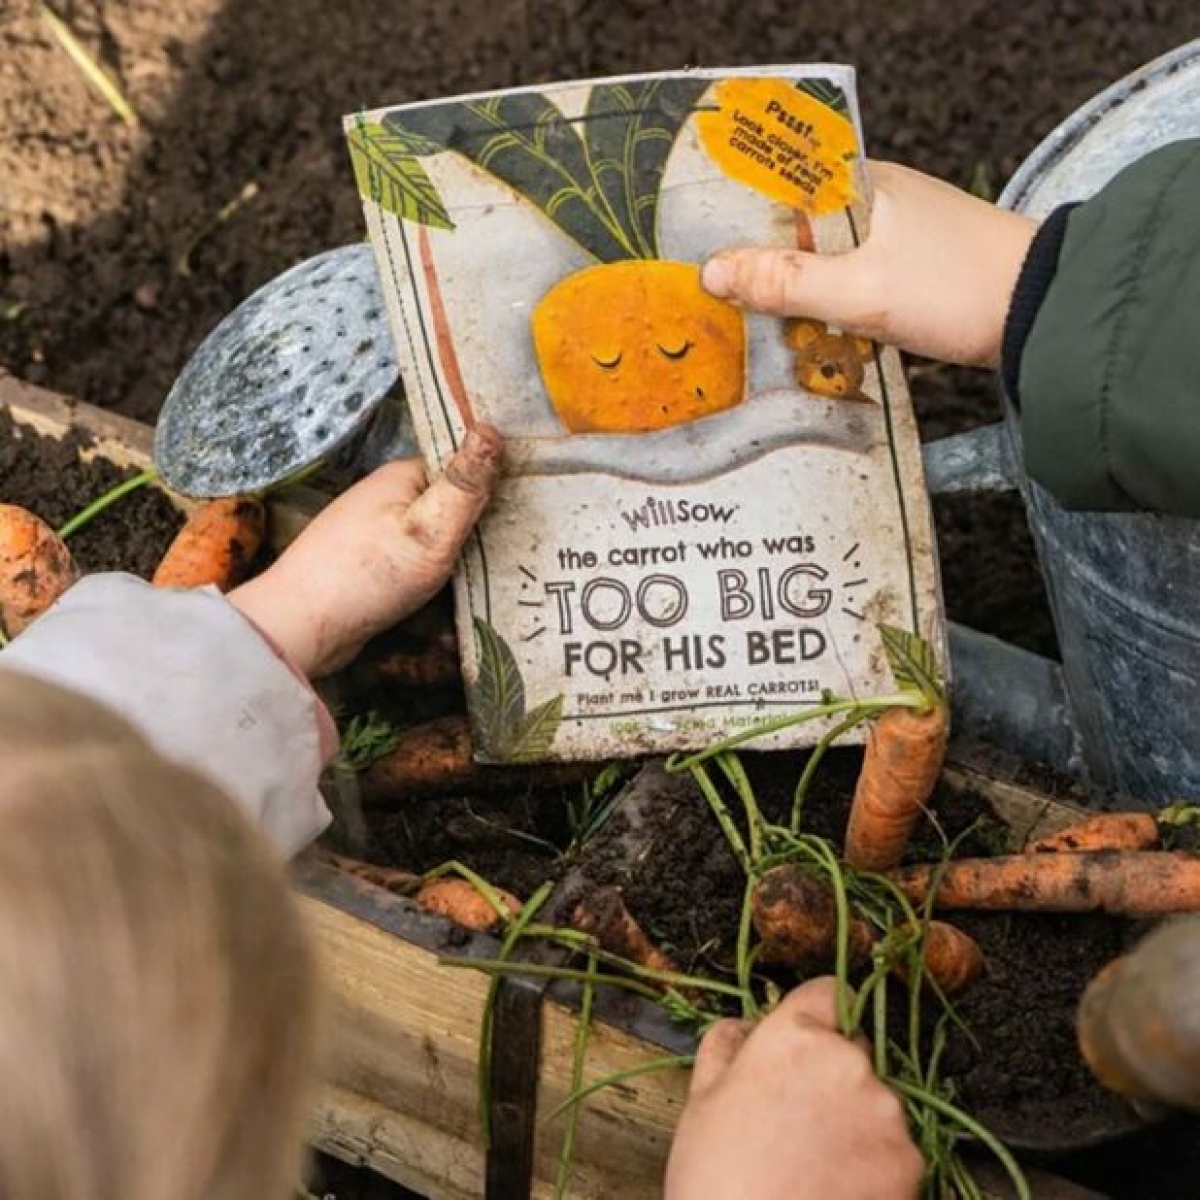 ‘The Carrot Who Was Too Big For His Bed’ Plantable Children’s Book